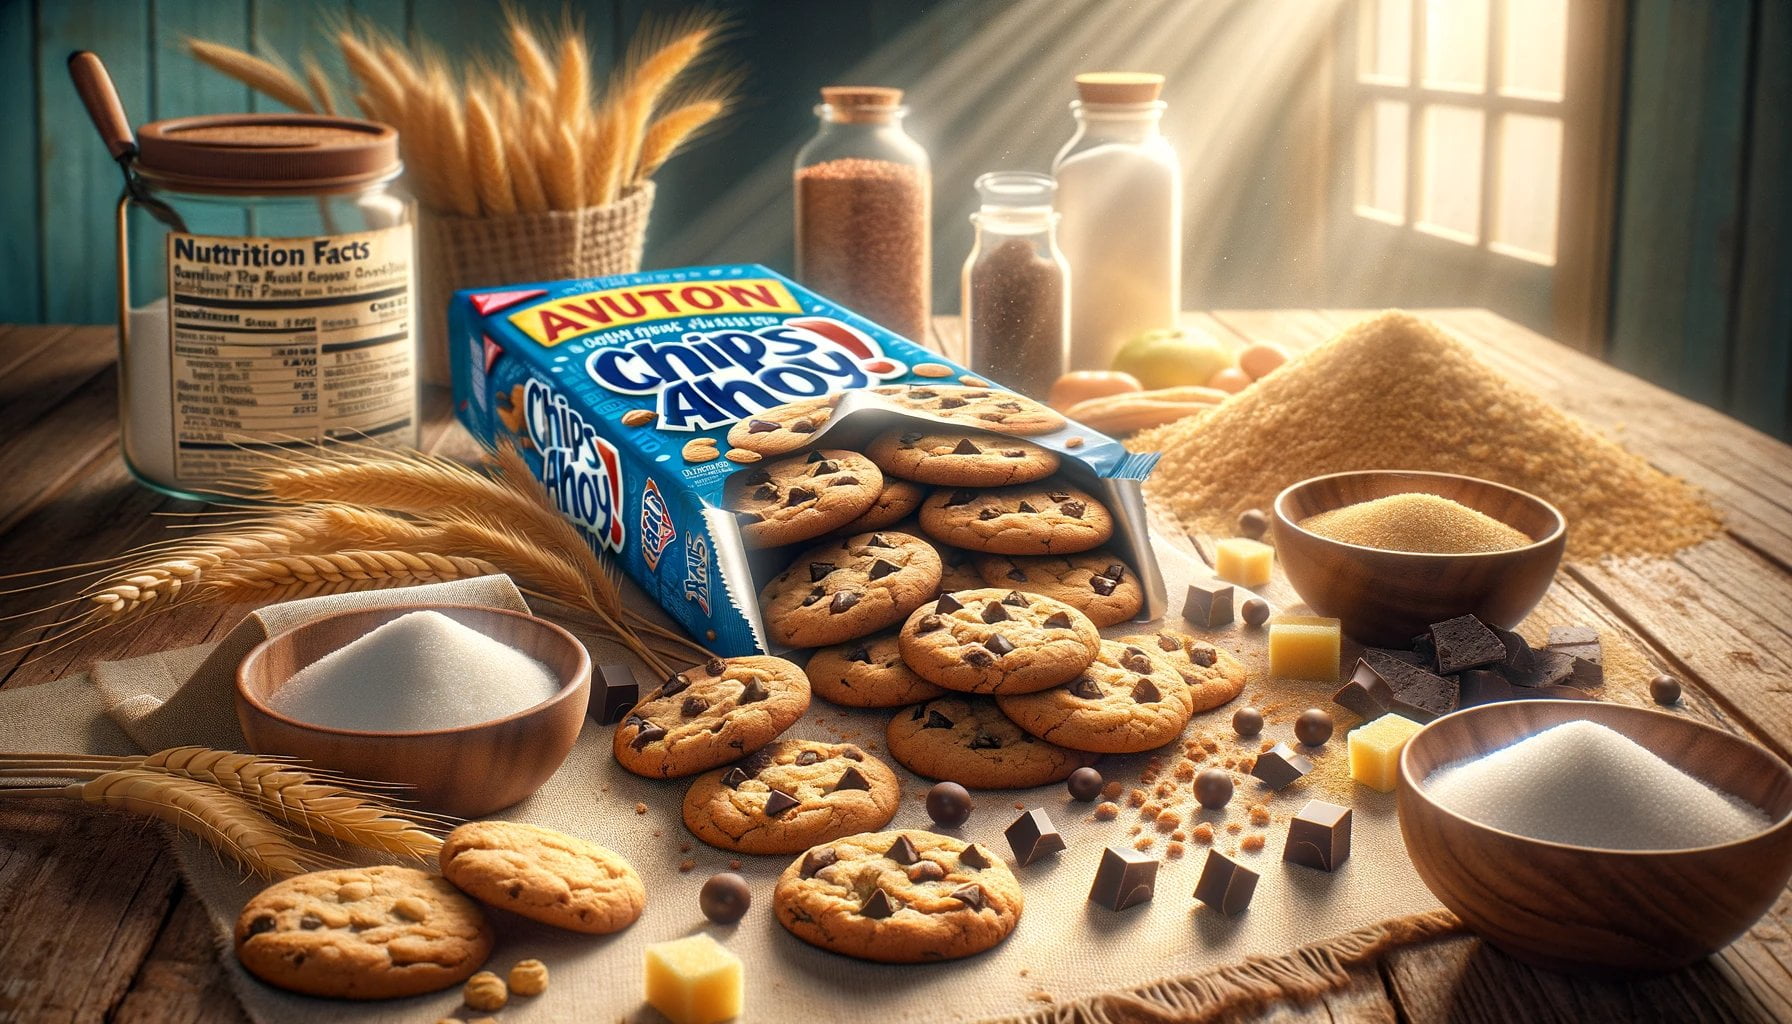 nutrition facts of chips ahoy